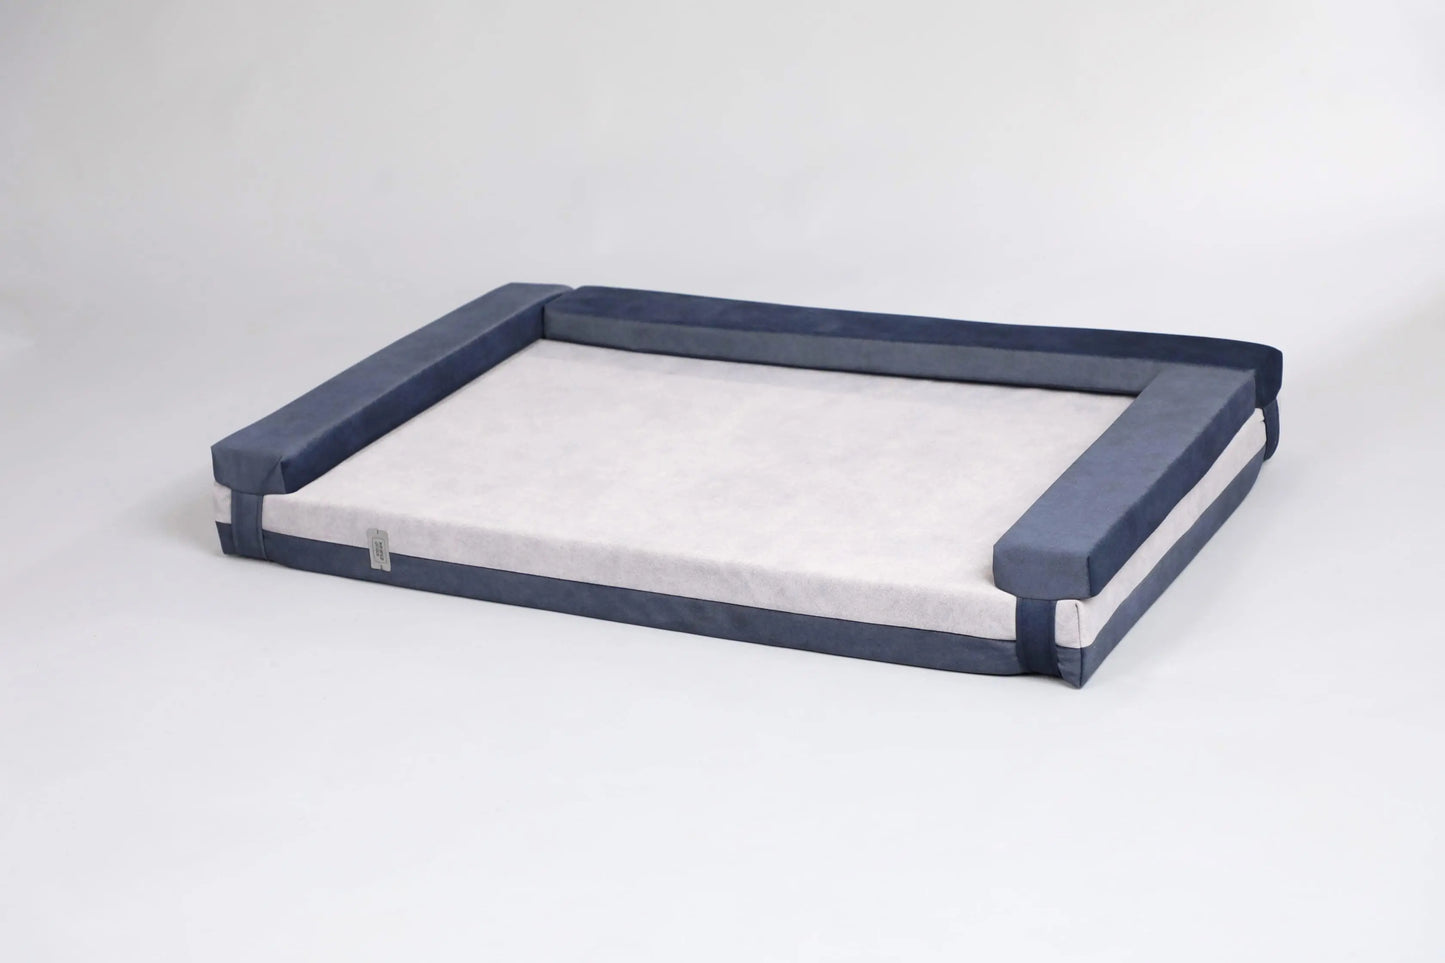 Transformer dog bed | Extra comfort & support | 2-sided | NAVY BLUE+CLOUD GREY